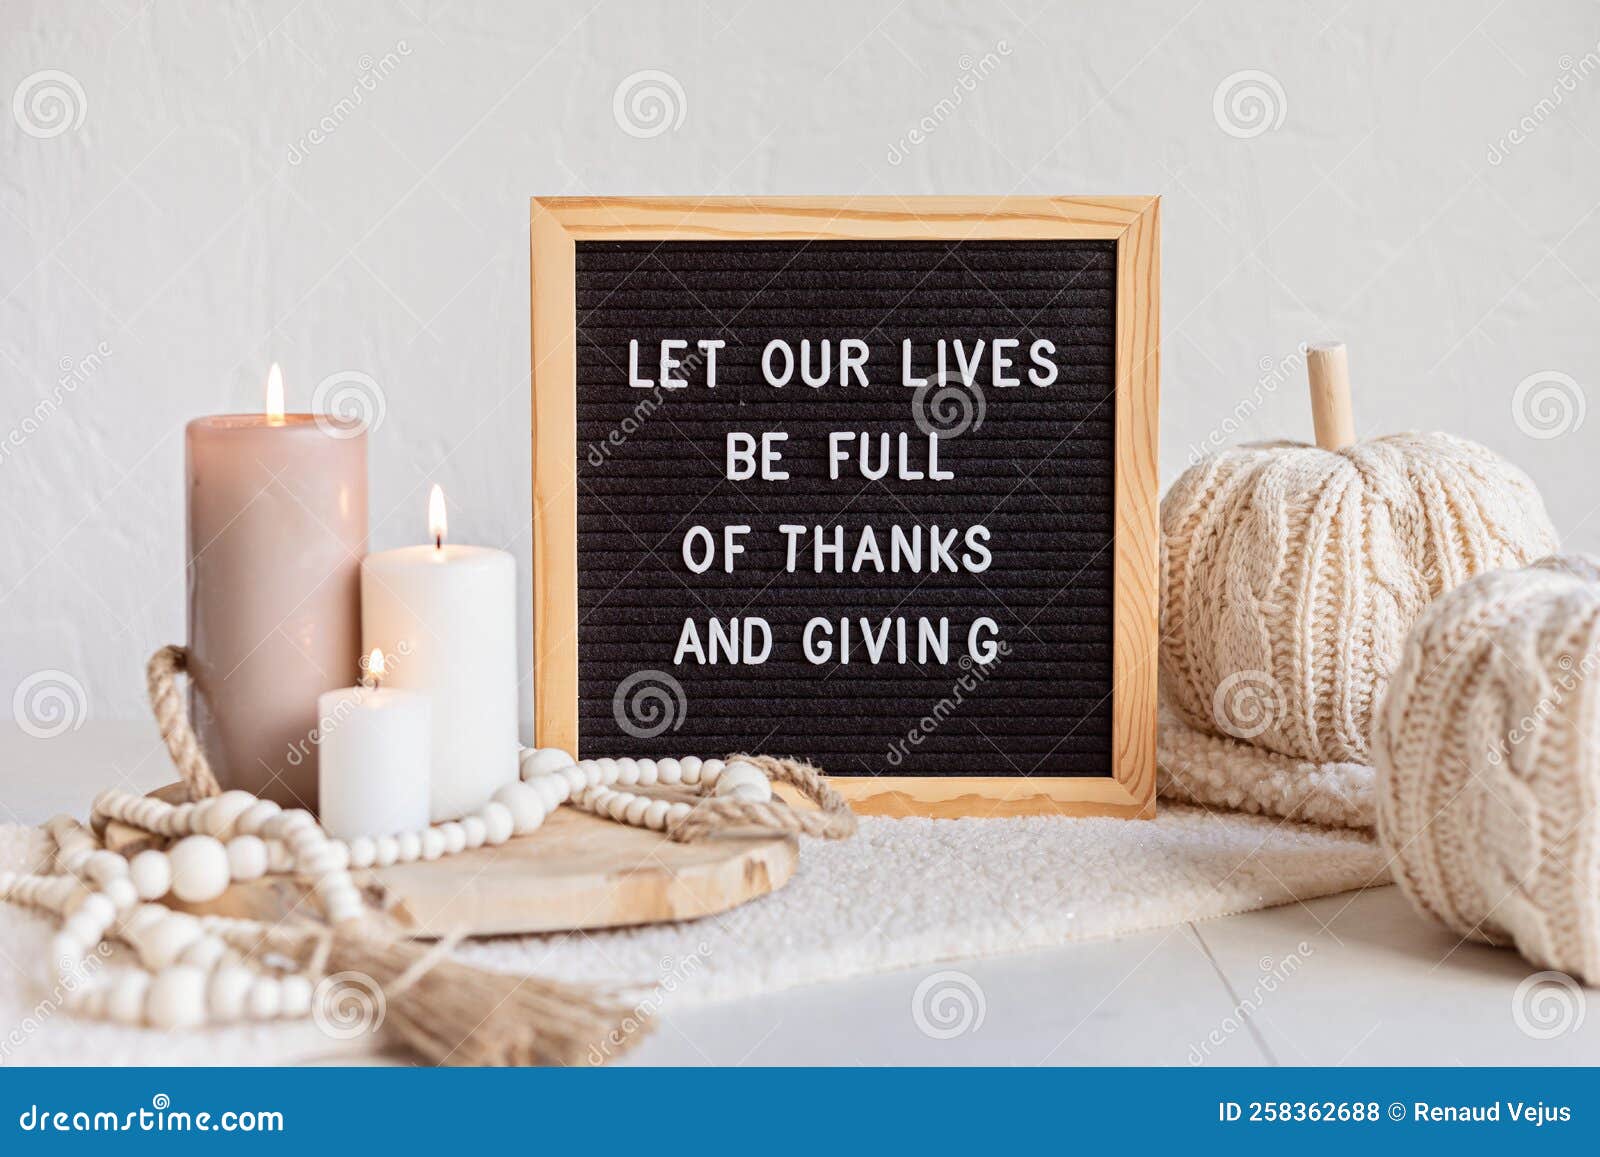 felt-letter-board-and-text-let-our-lives-be-full-of-thanks-and-giving